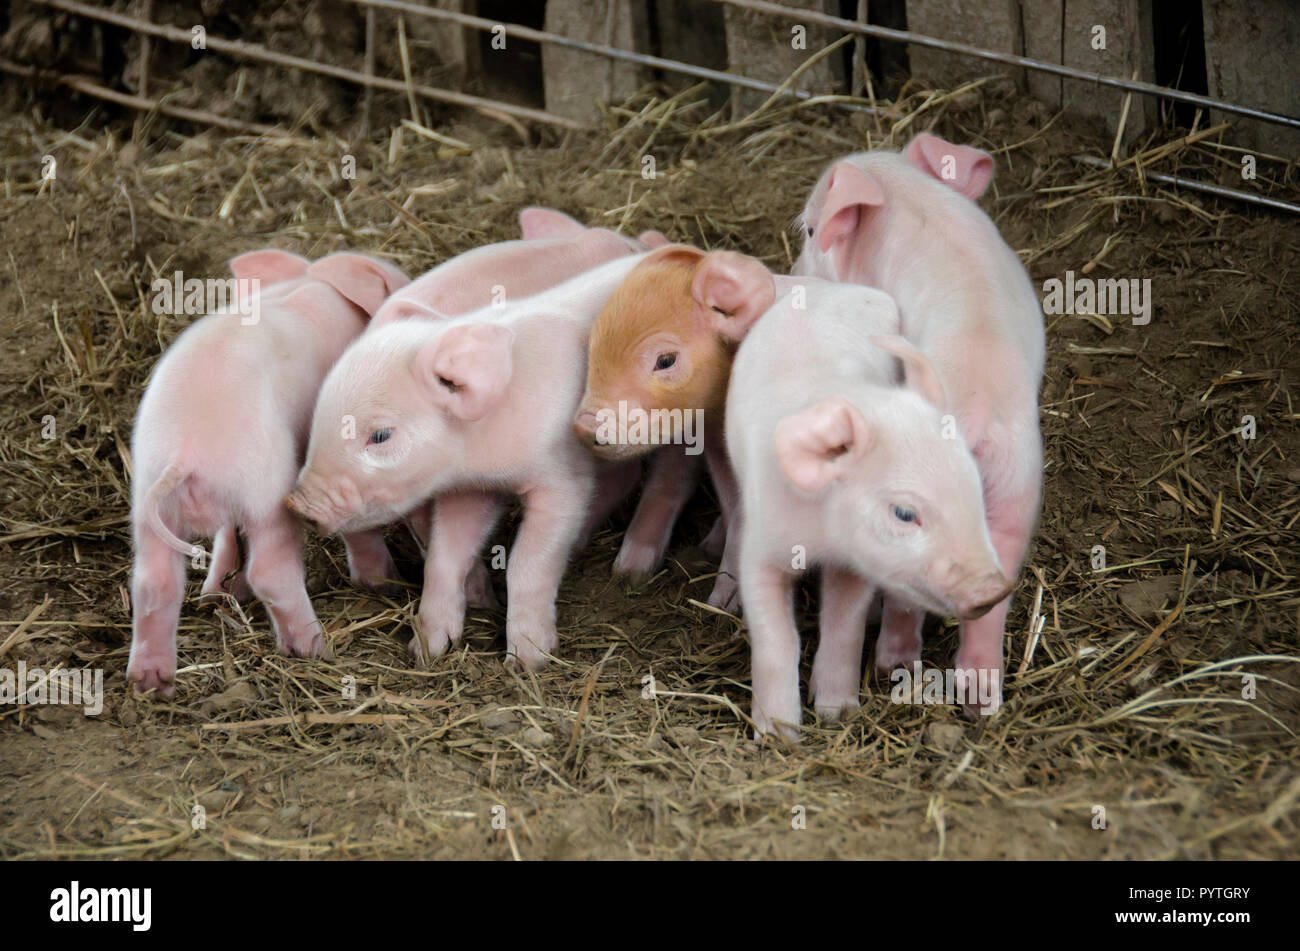 A group of piglets huddled together in a barn Stock Photo